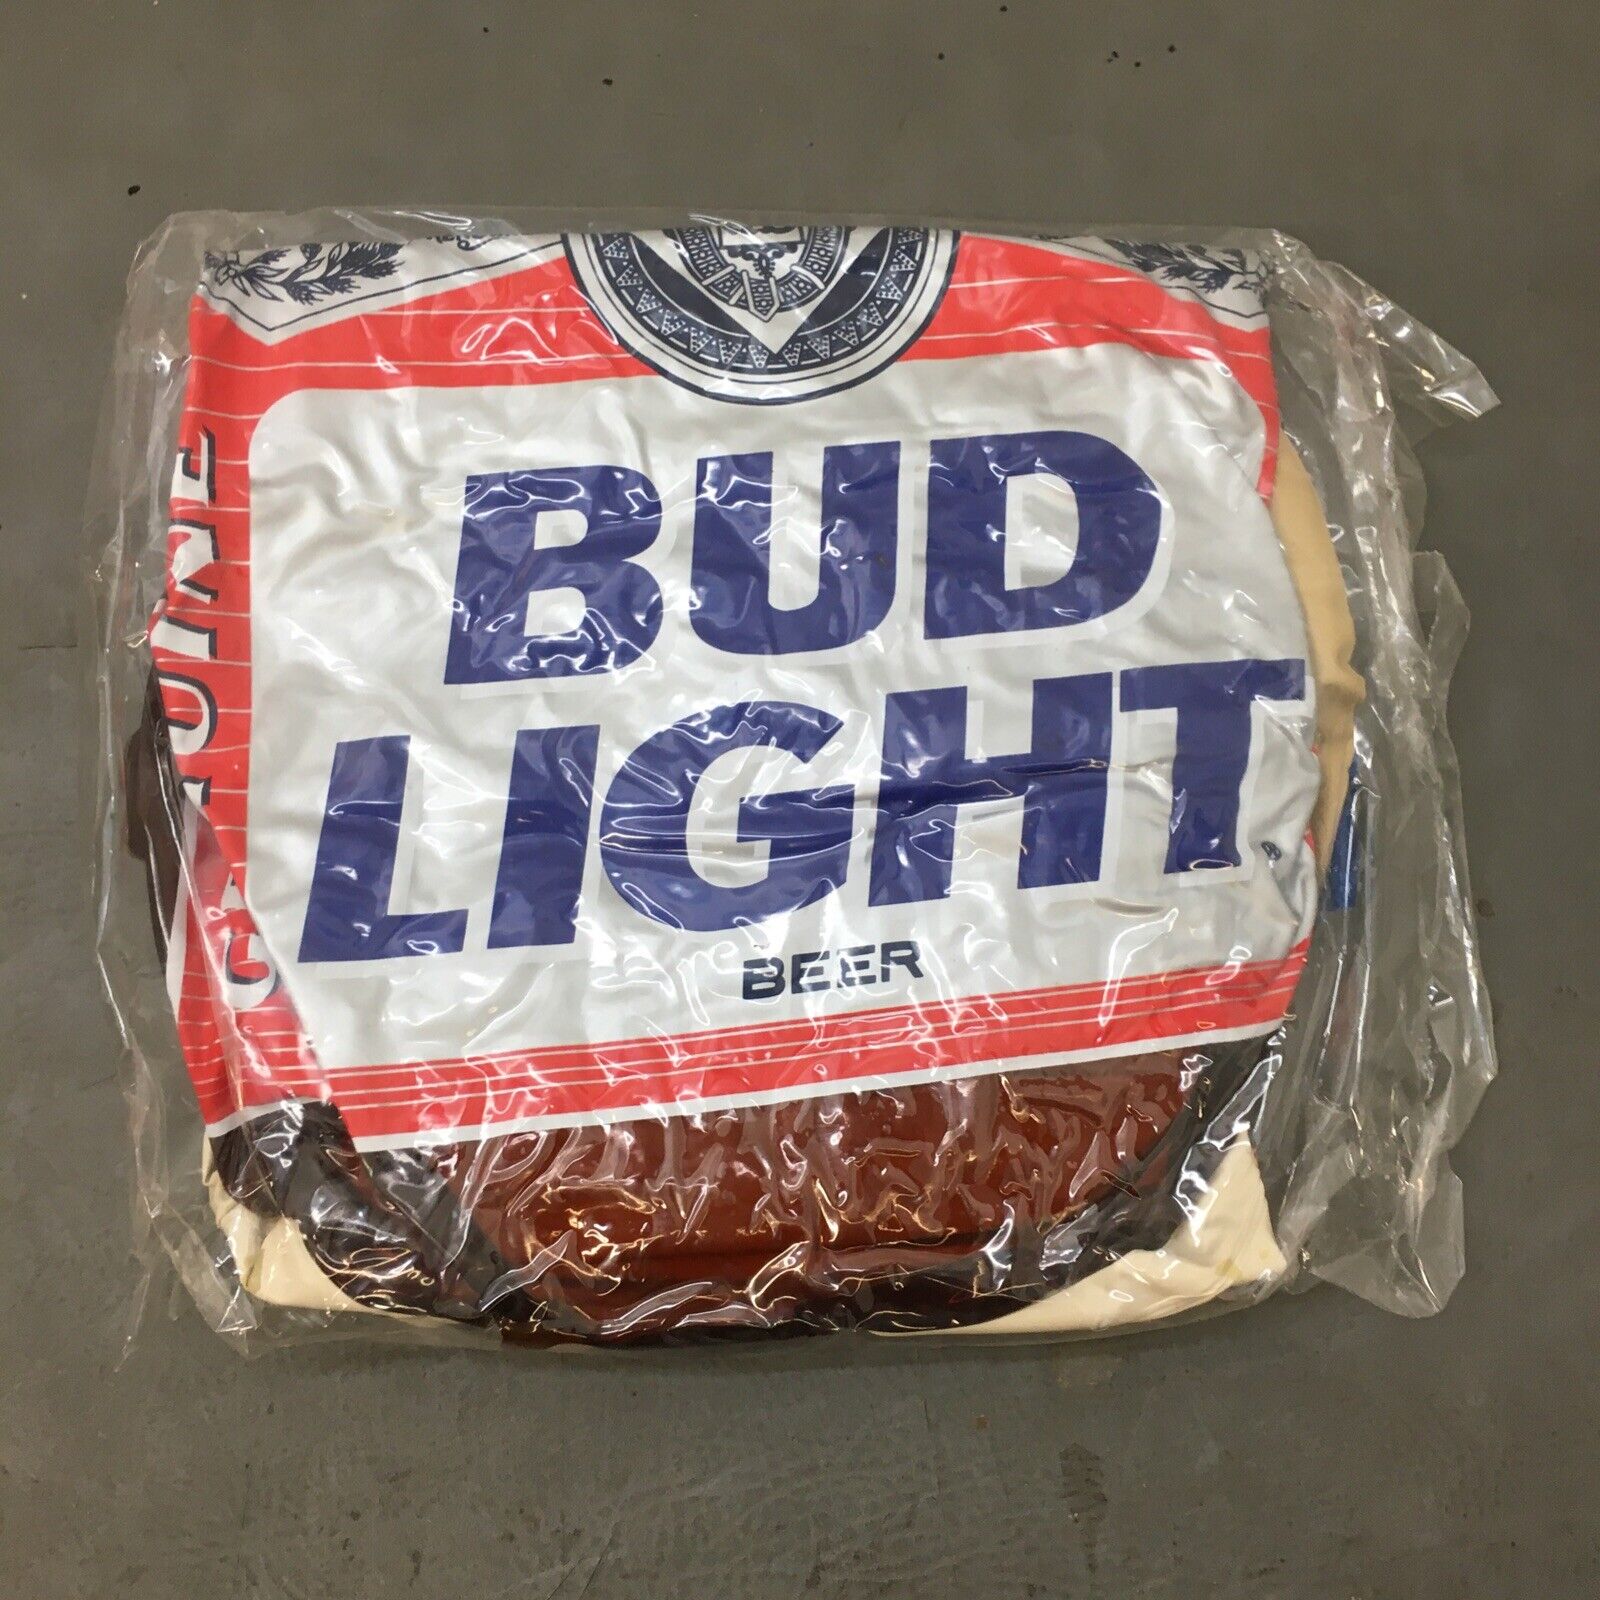 NOS Budweiser Bud Light Inflatable Rodeo Cowboy Mancave Store Display Blow Up 36